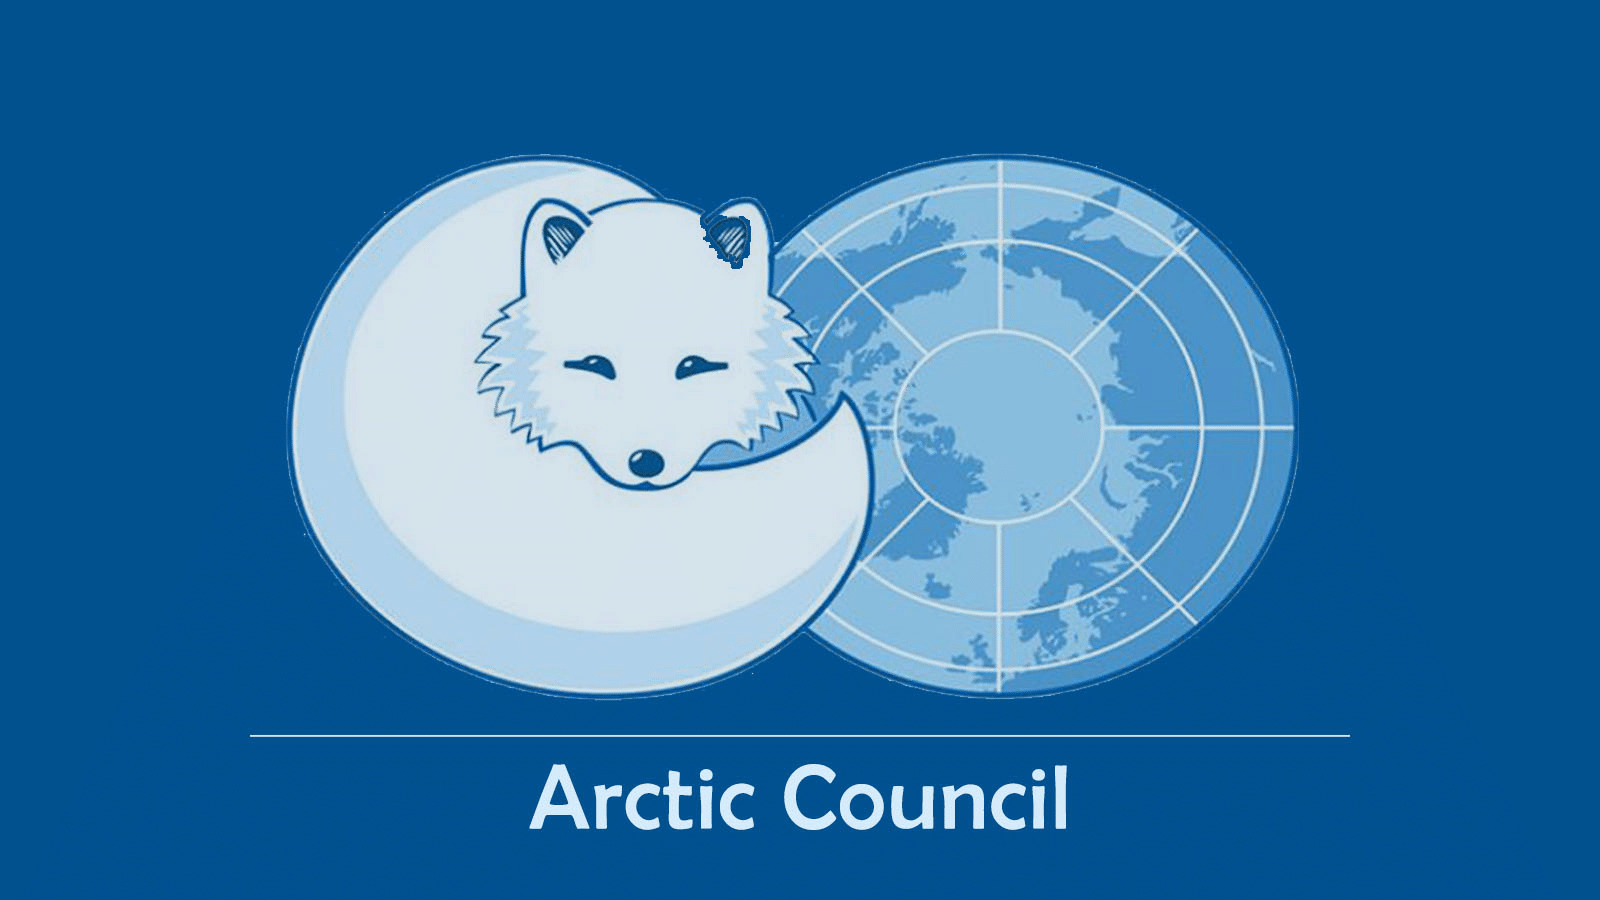 Logo of the Arctic Council in blue